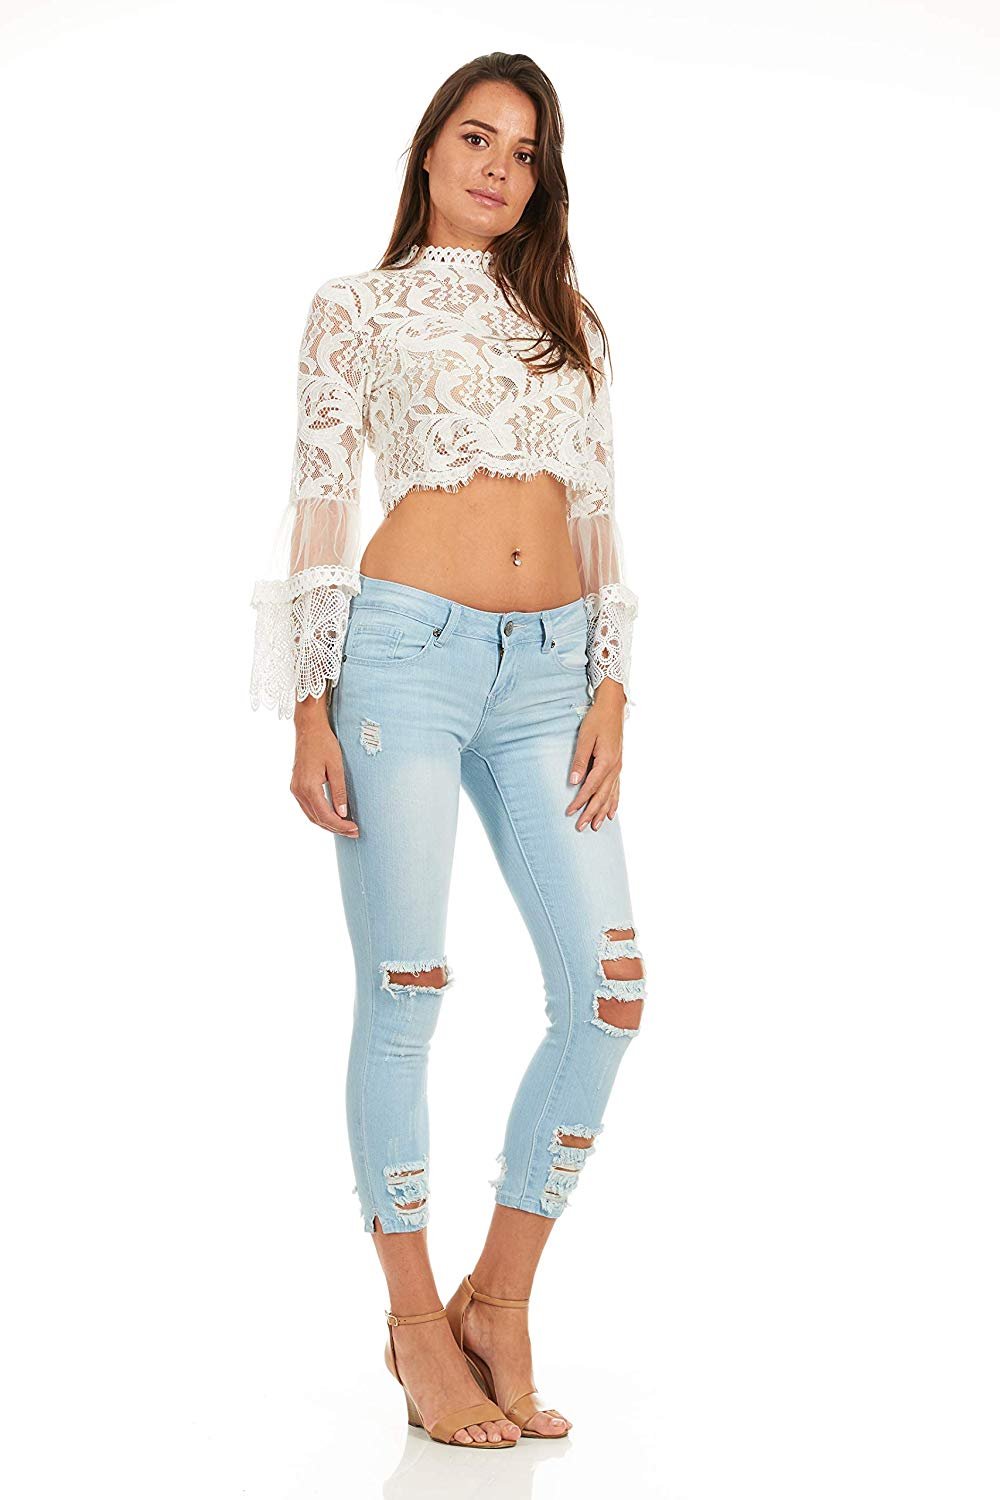 CG JEANS Plus Size Cute Juniors Big Mid Rise Large Ripped Torn Crop Skinny Fit, Sky Blue Denim, 20 - image 3 of 5